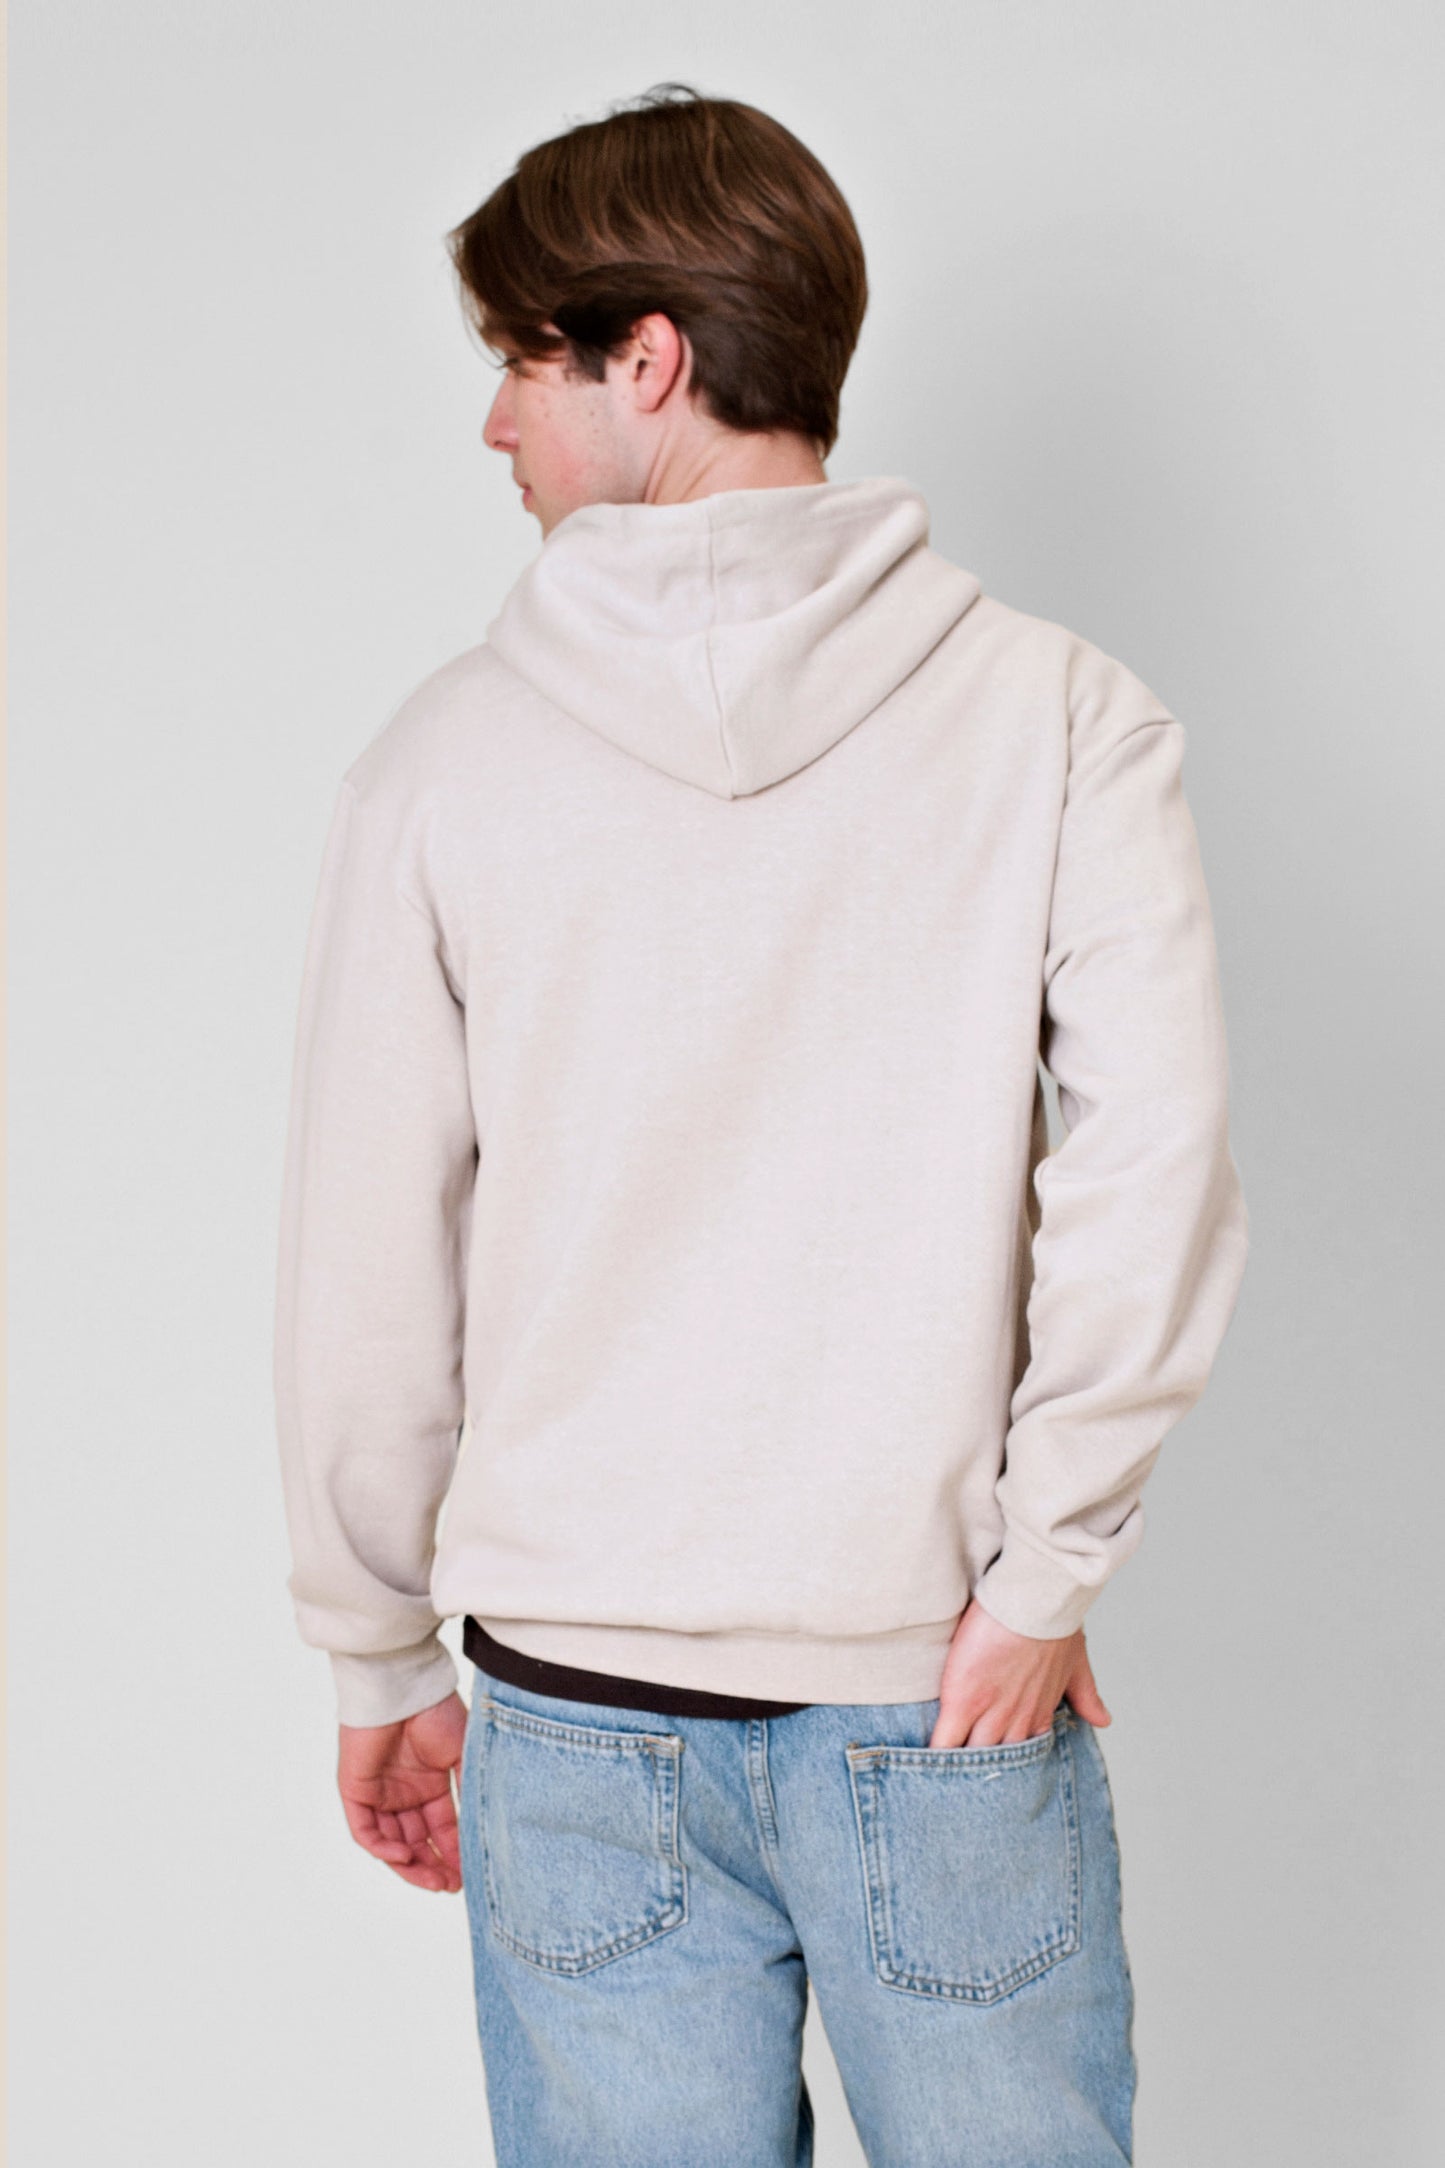 Experience the ultimate comfort of this soft combed hemp and organic cotton fleece hooded sweatshirt in a muted concrete color.